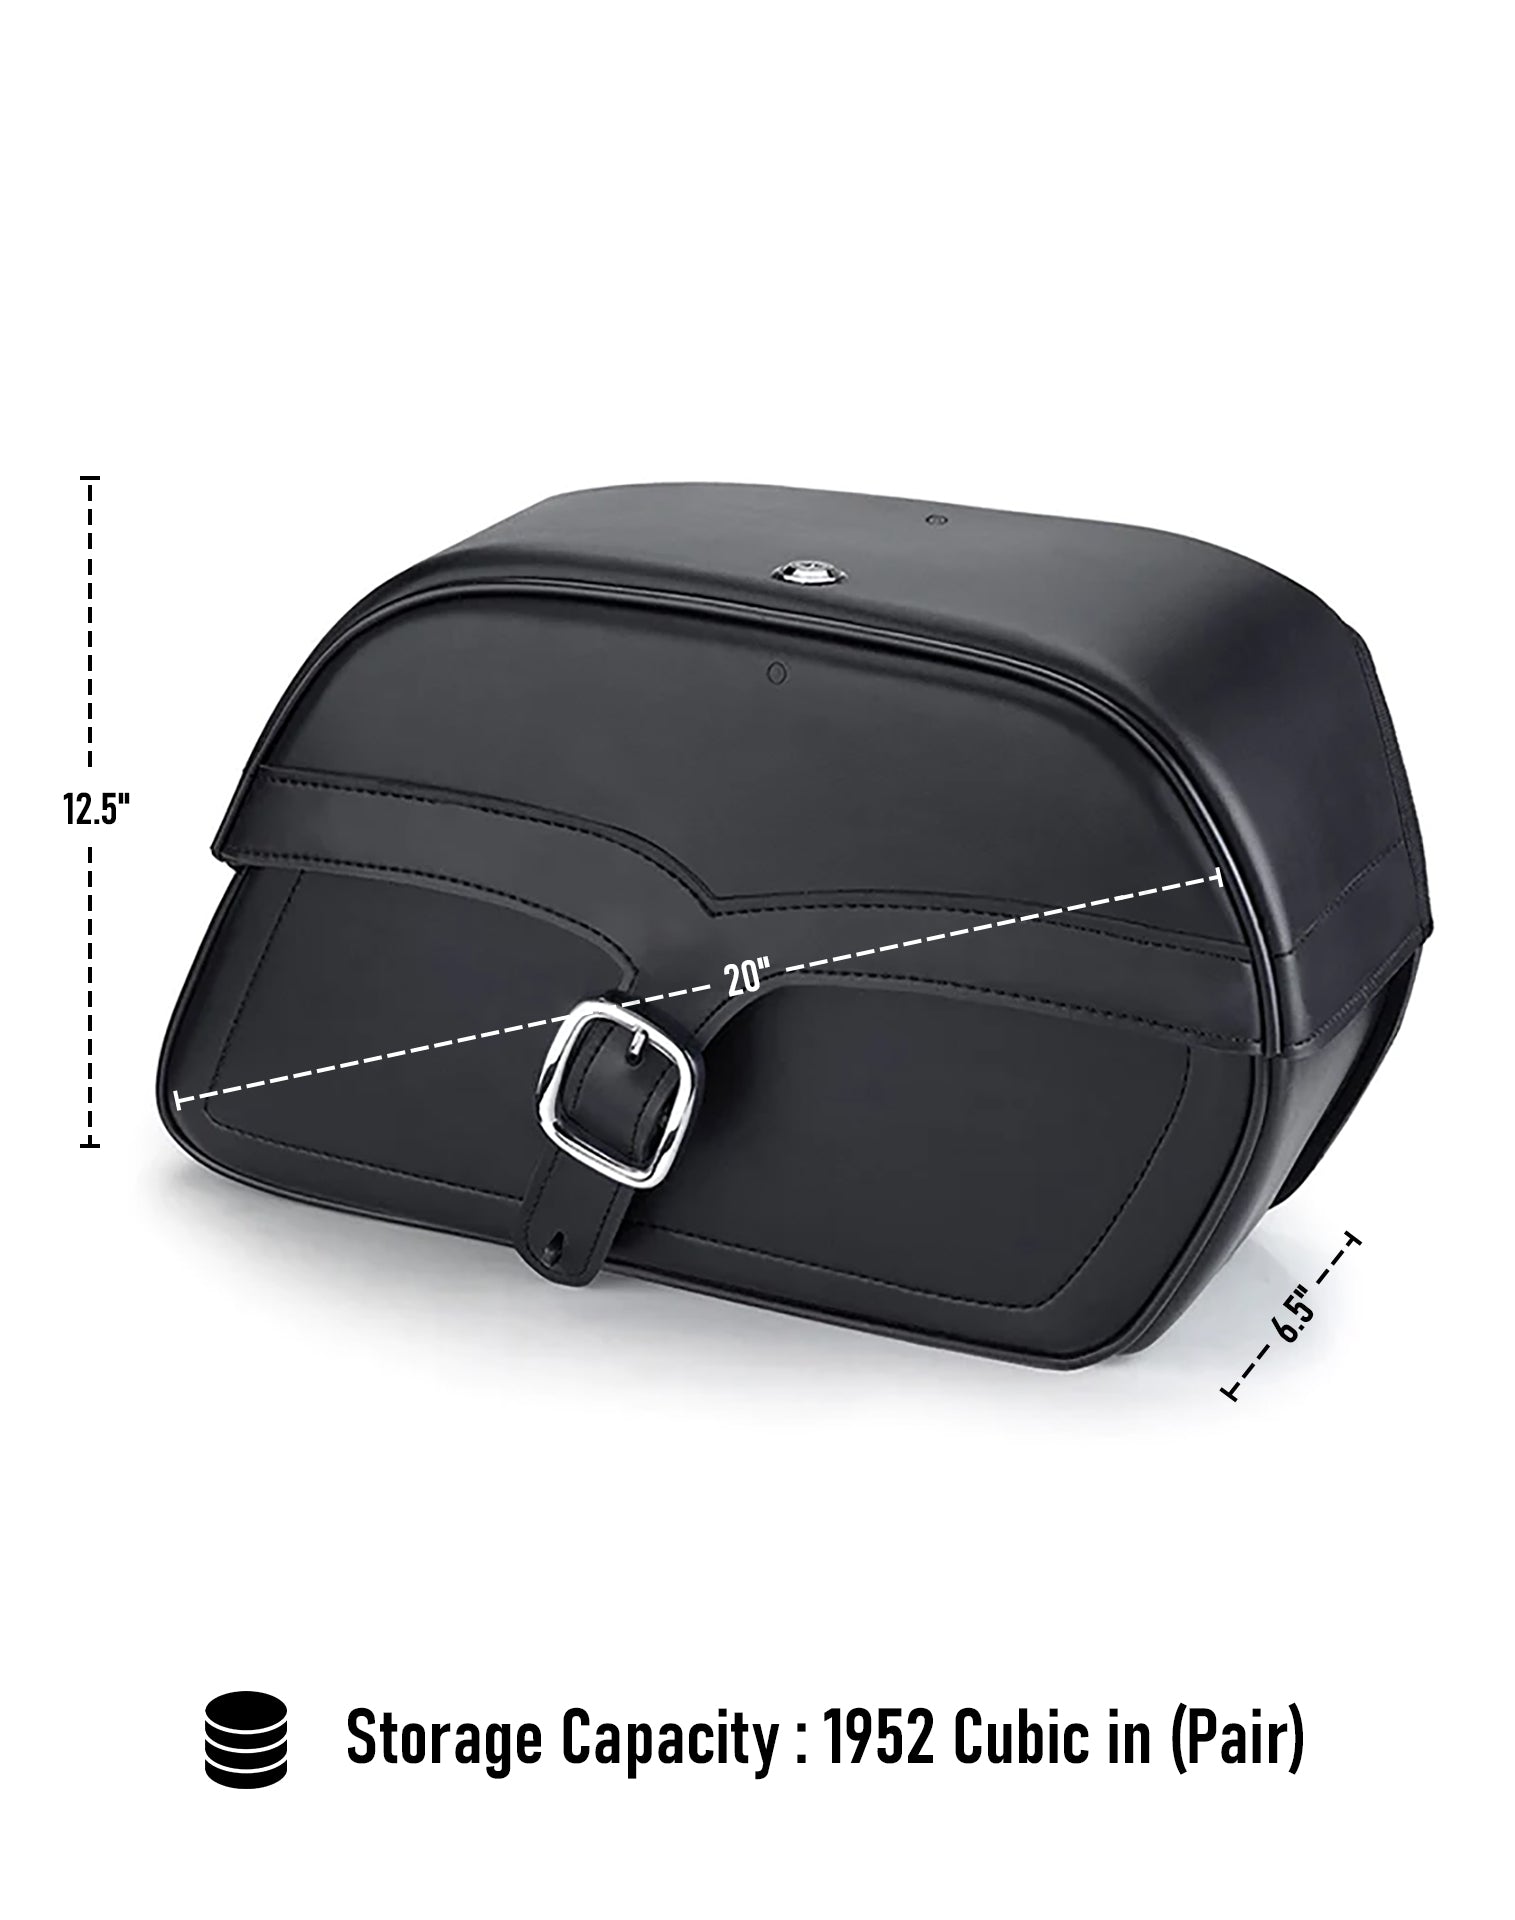 Viking Vintage Single Strap Large Victory High Ball Leather Motorcycle Saddlebags Weather Resistant Bags Comes in Pair